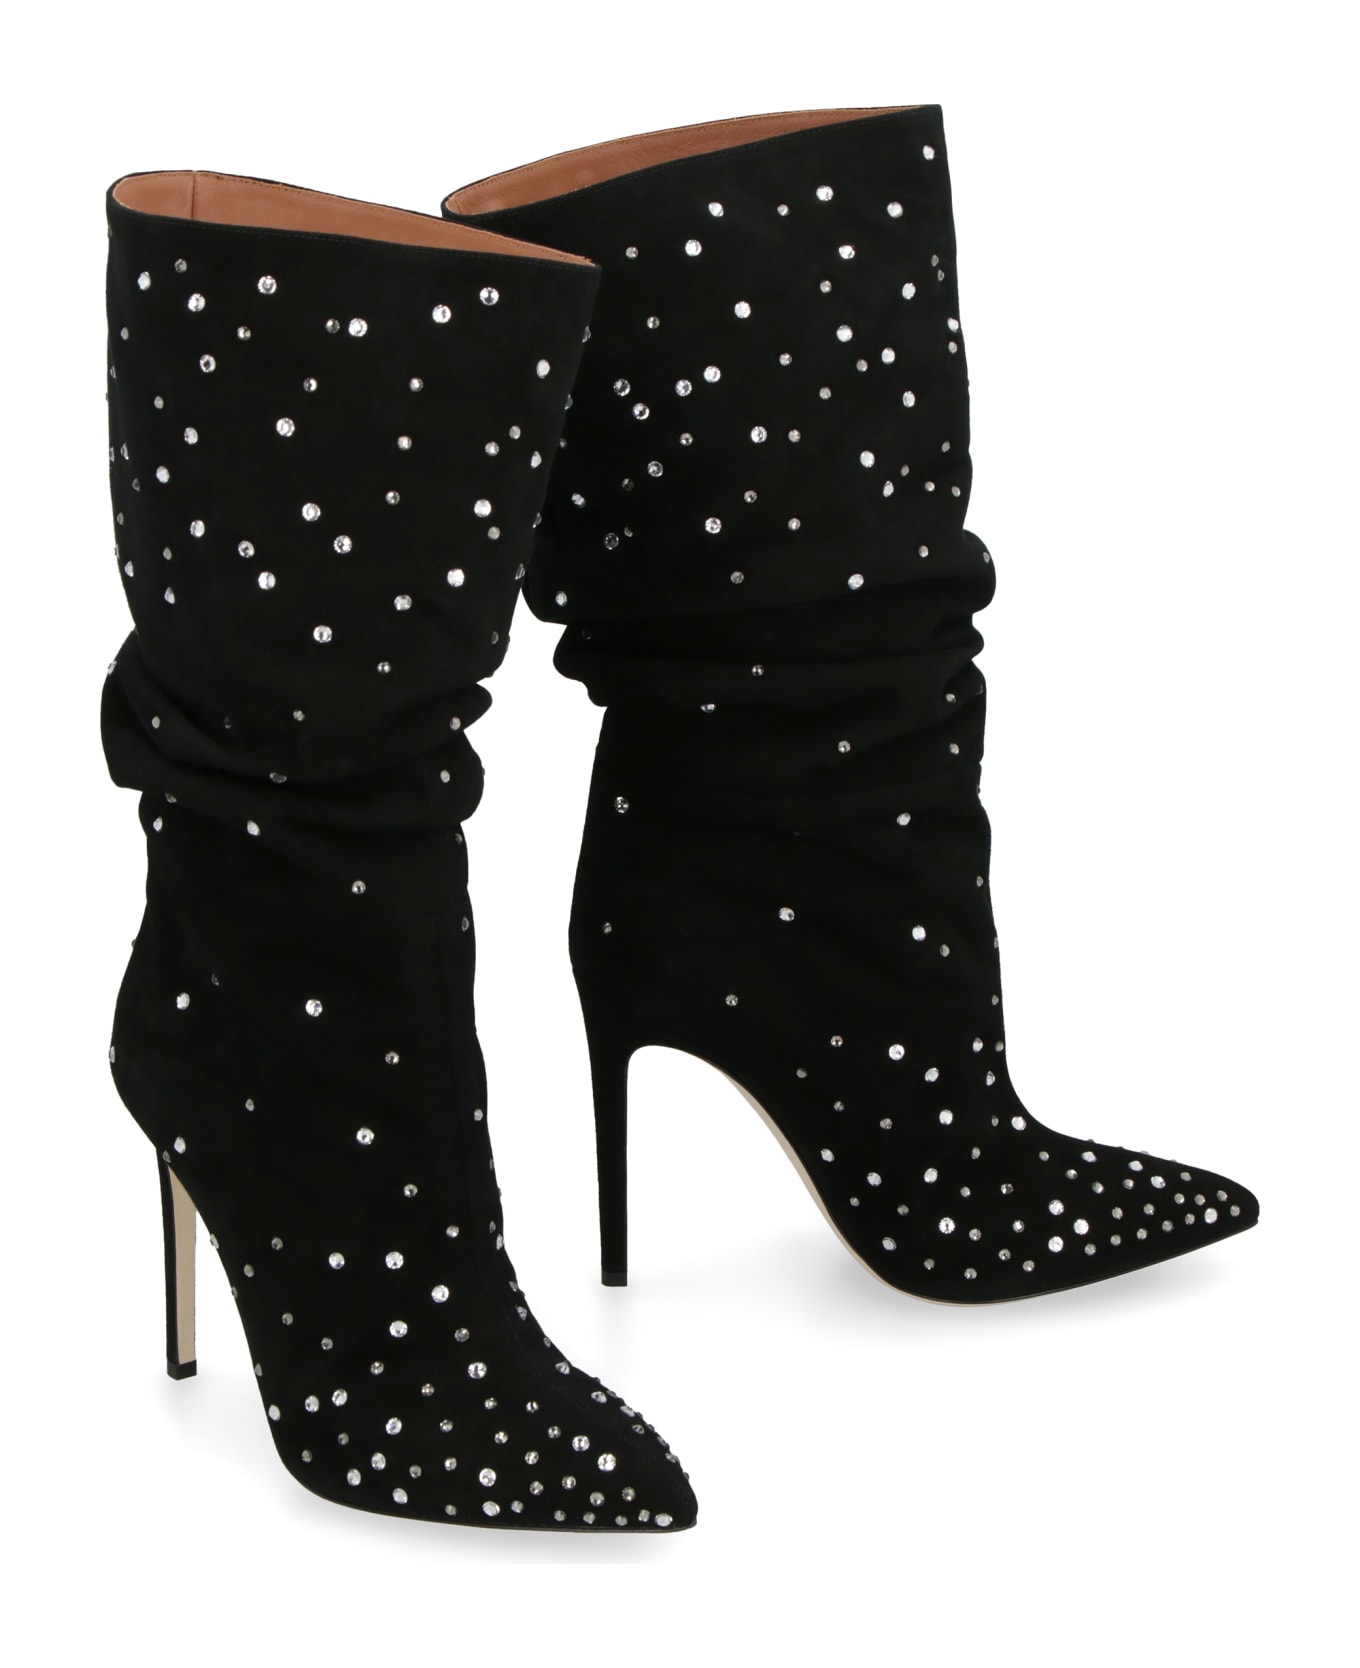 Paris Texas Holly Suede Knee High Boots - black